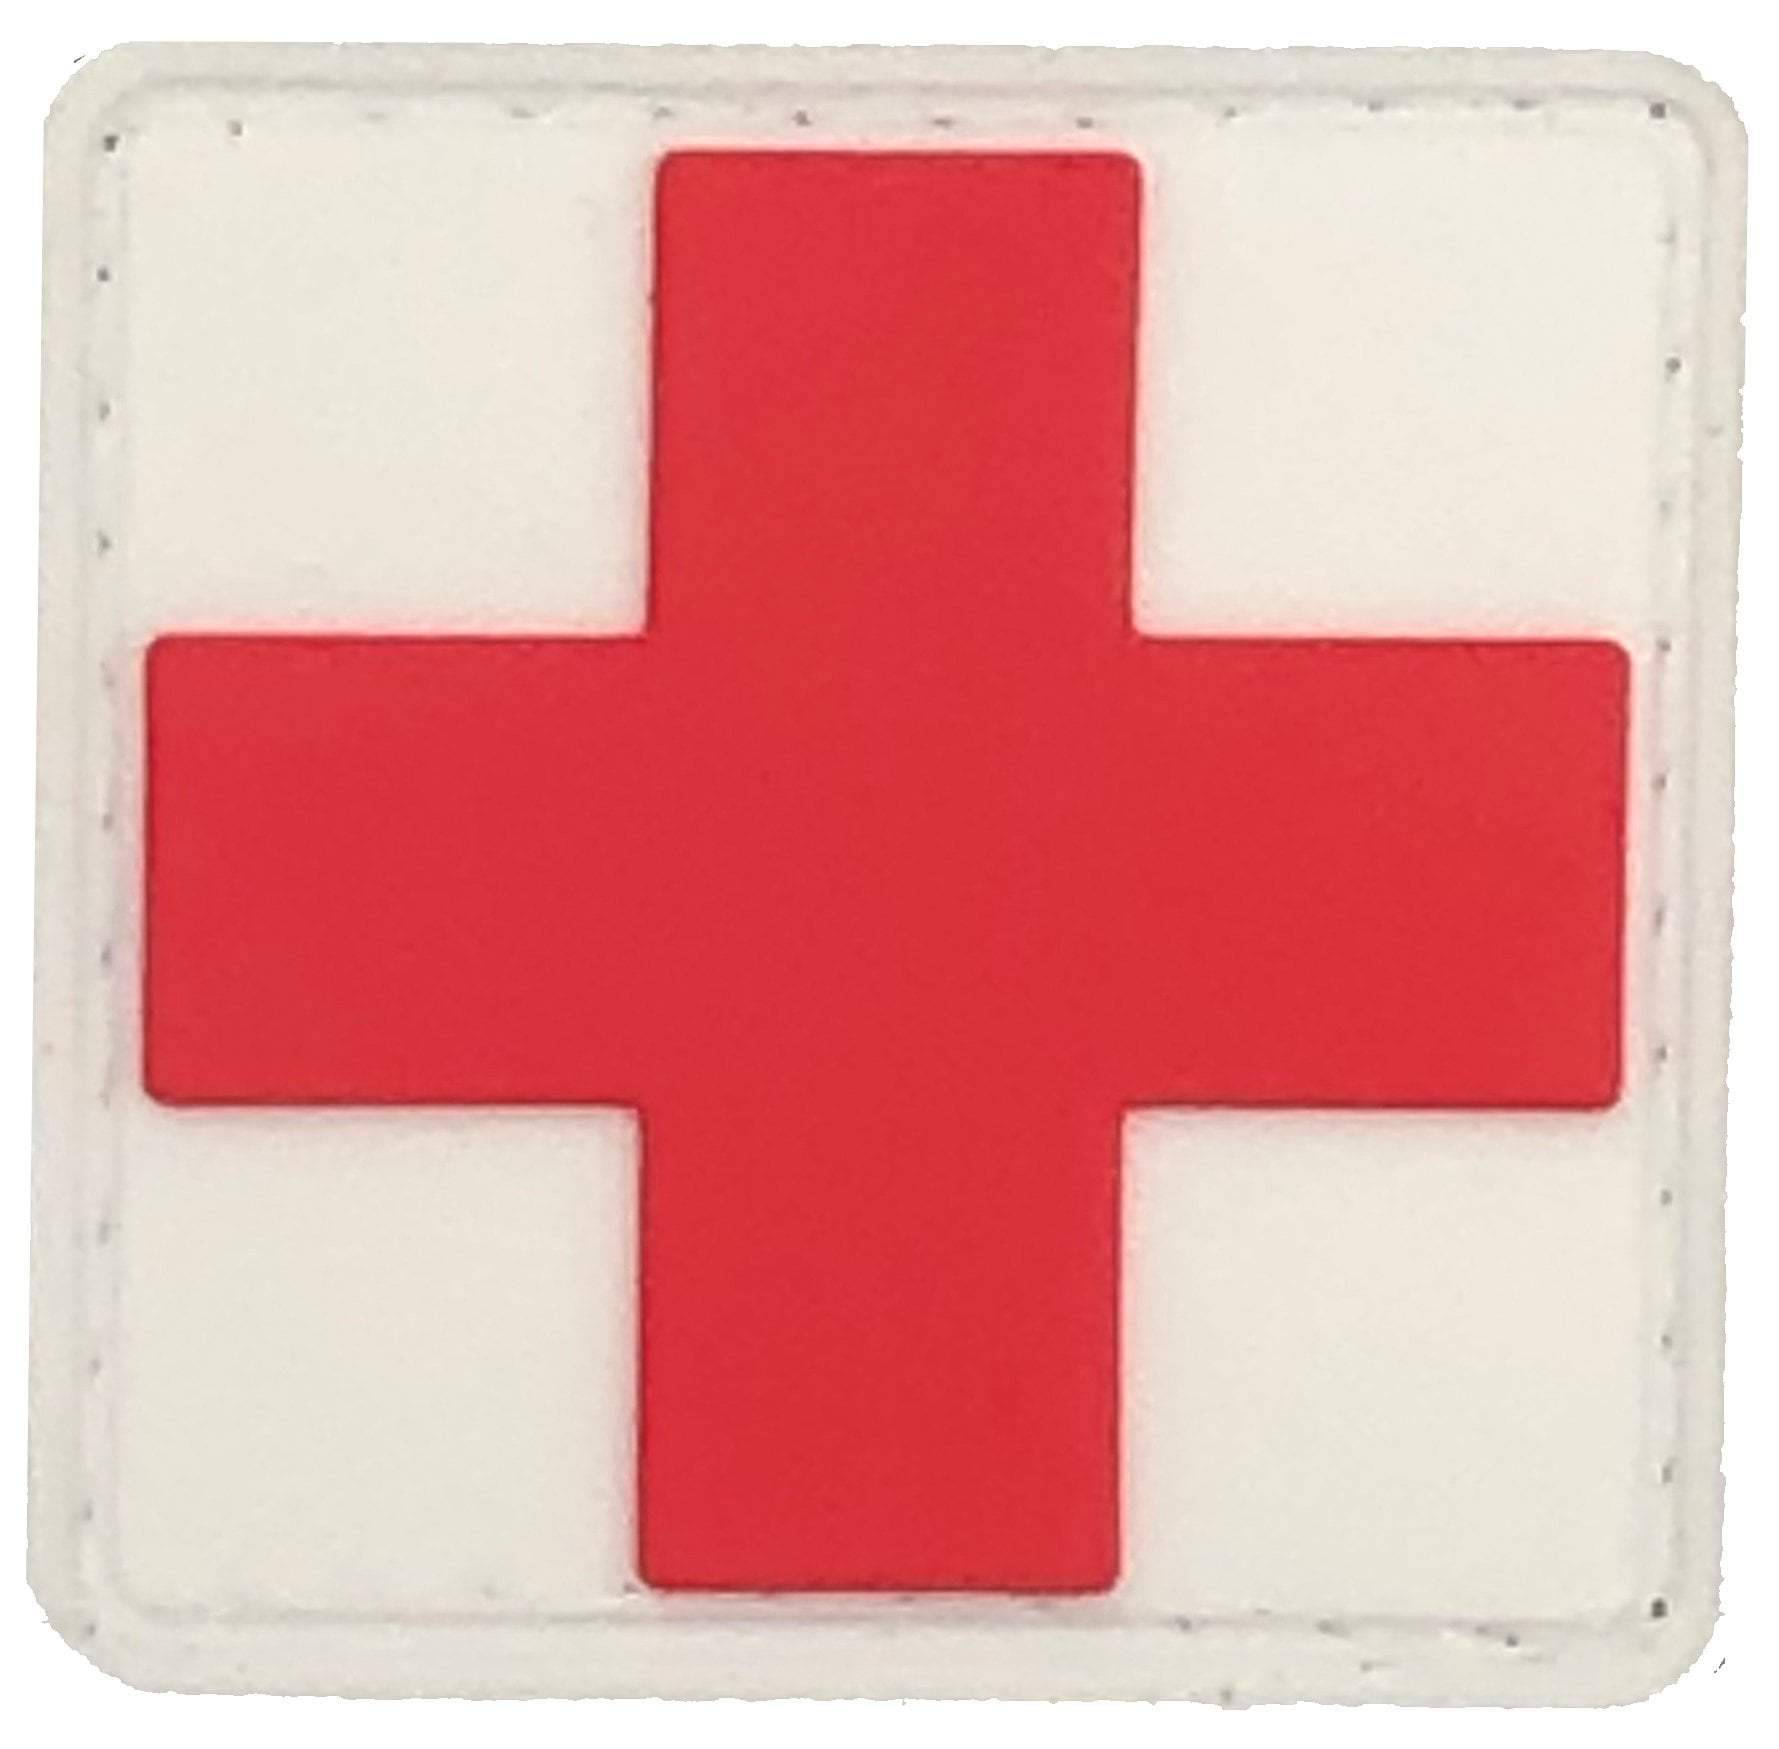 Medic Rubber 3D PVC Patch Medical Paramedic Tactical Morale Badge Patches Hook Fasteners Backing 2.95 x 2.95 inch Bubble of 2 Pieces